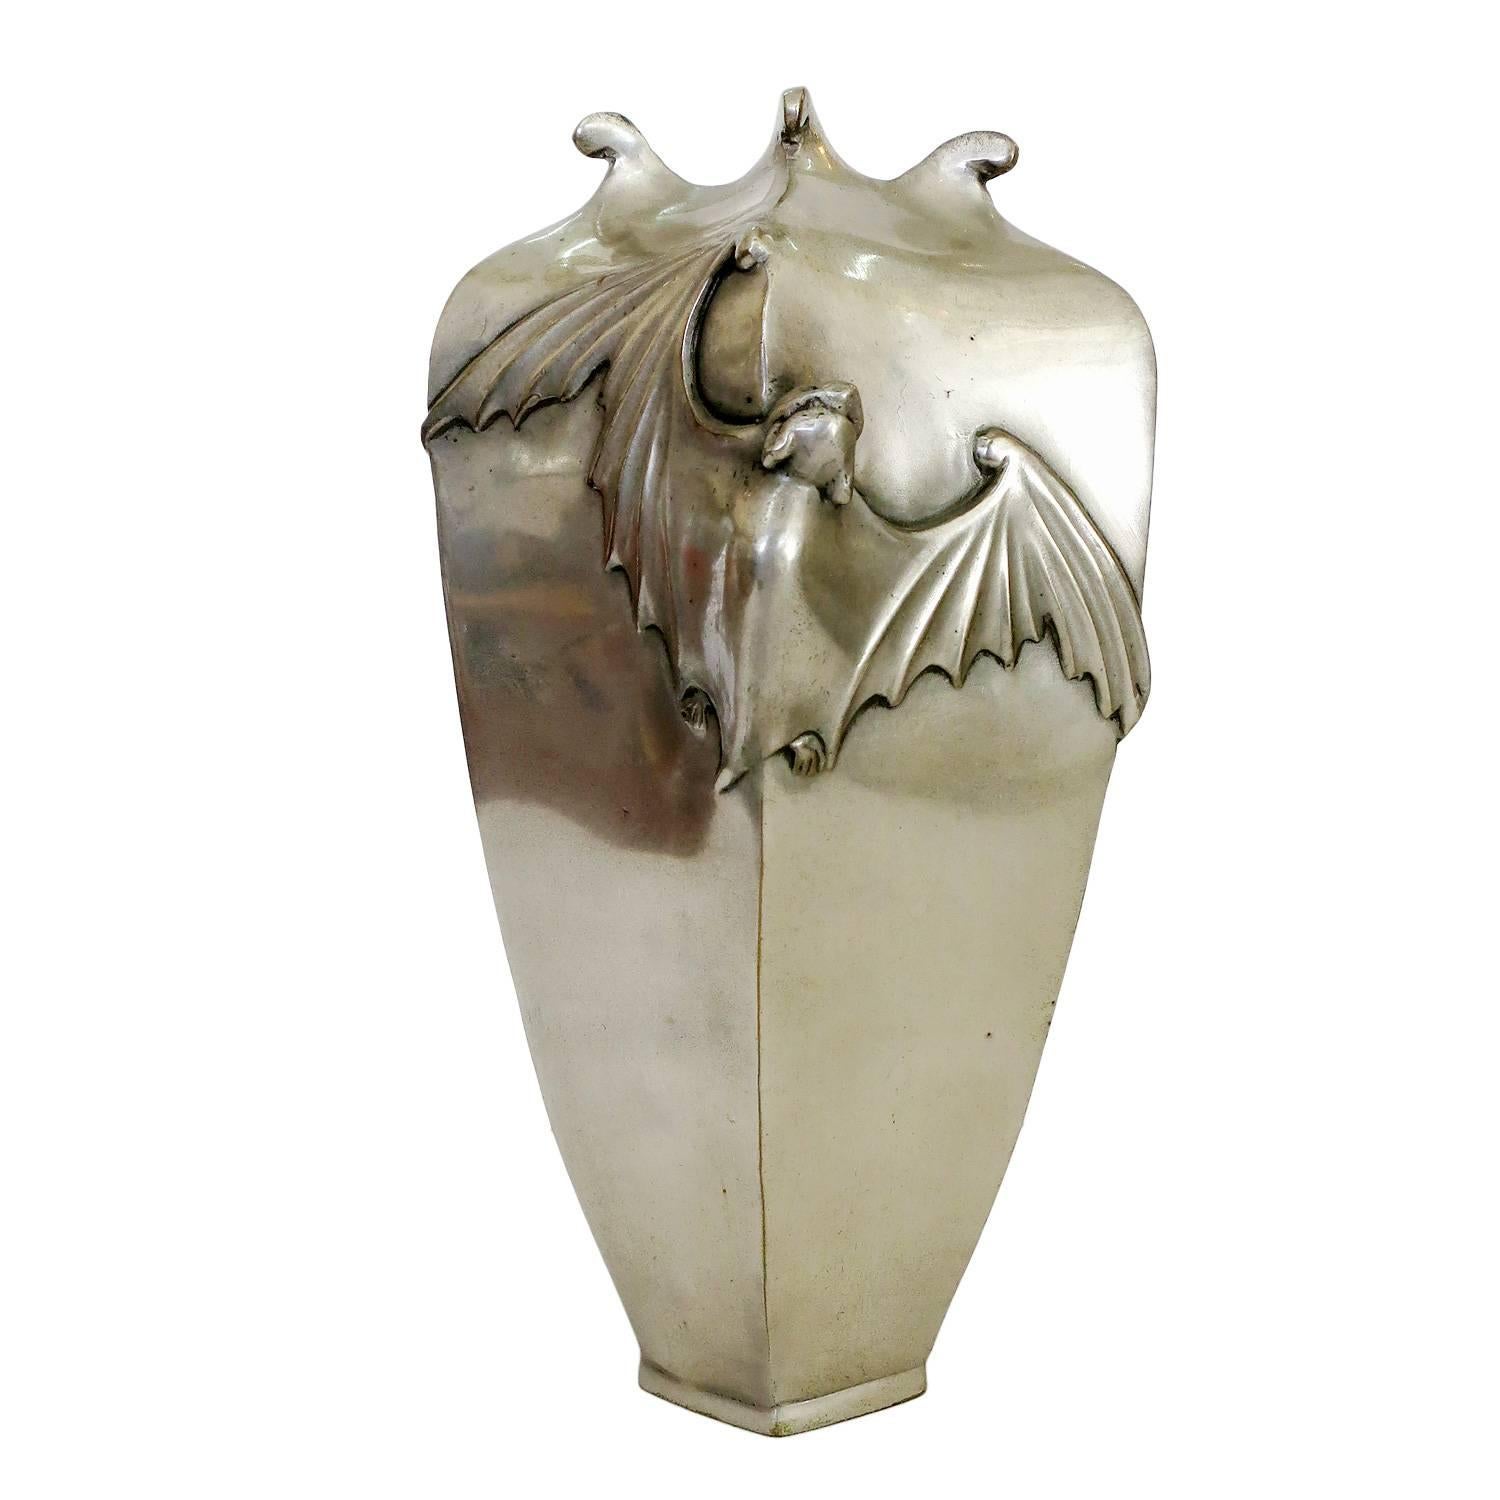 Casting from an original antique Japanese vase that was made in 1890 this solid bronze vase is finished in antique silver. The six-sided, tapered design with rolled tips at the opening features a bat spreads across two sides with an Art Nouveau